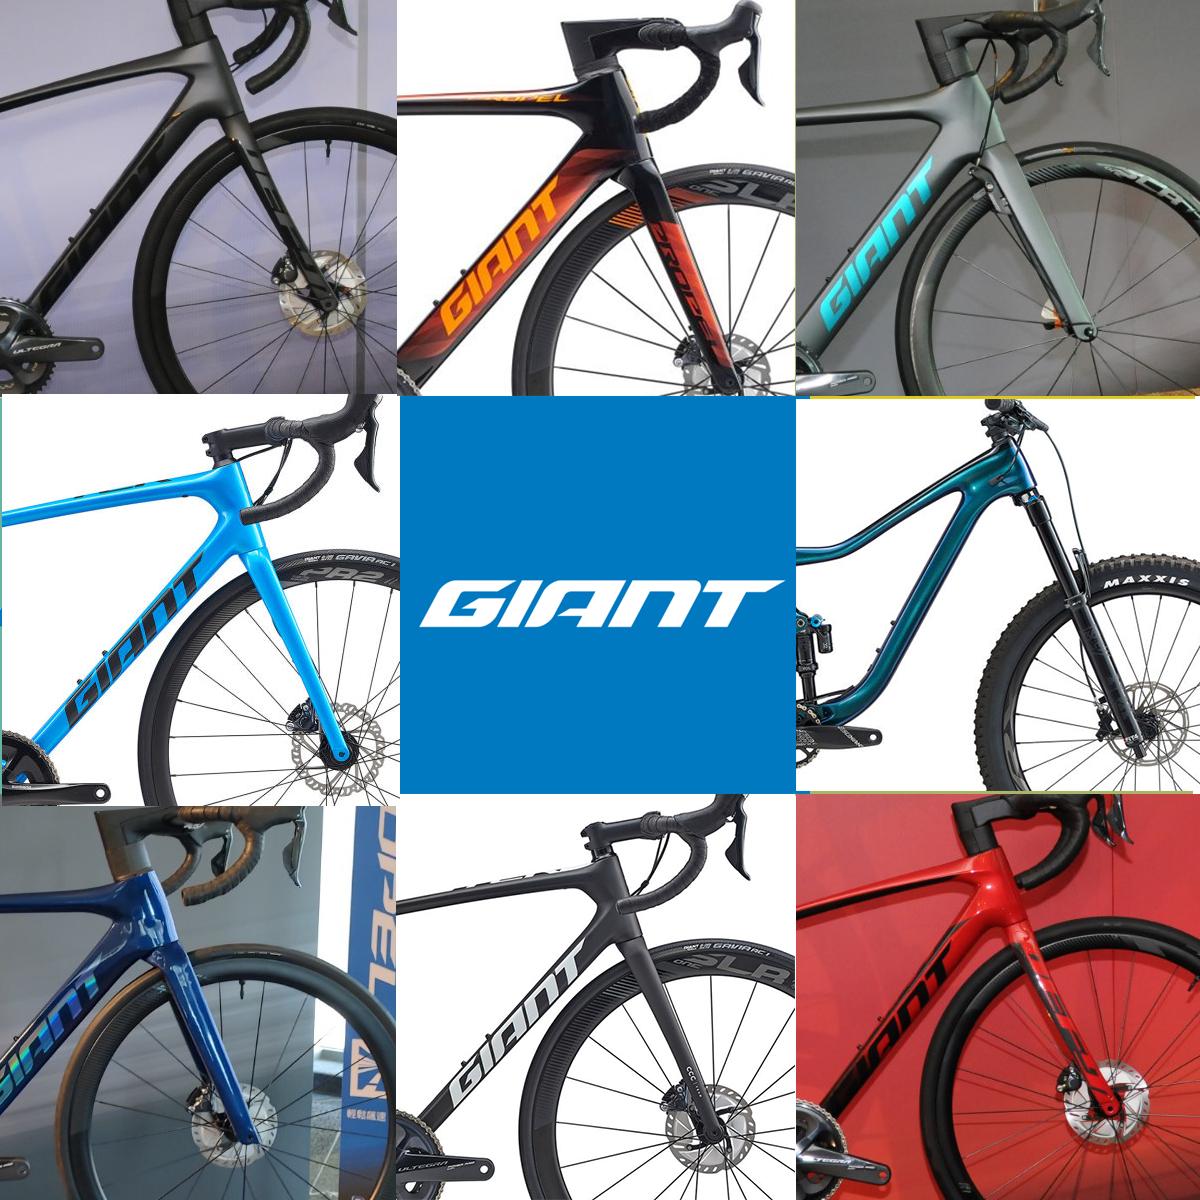 giant brand bicycles